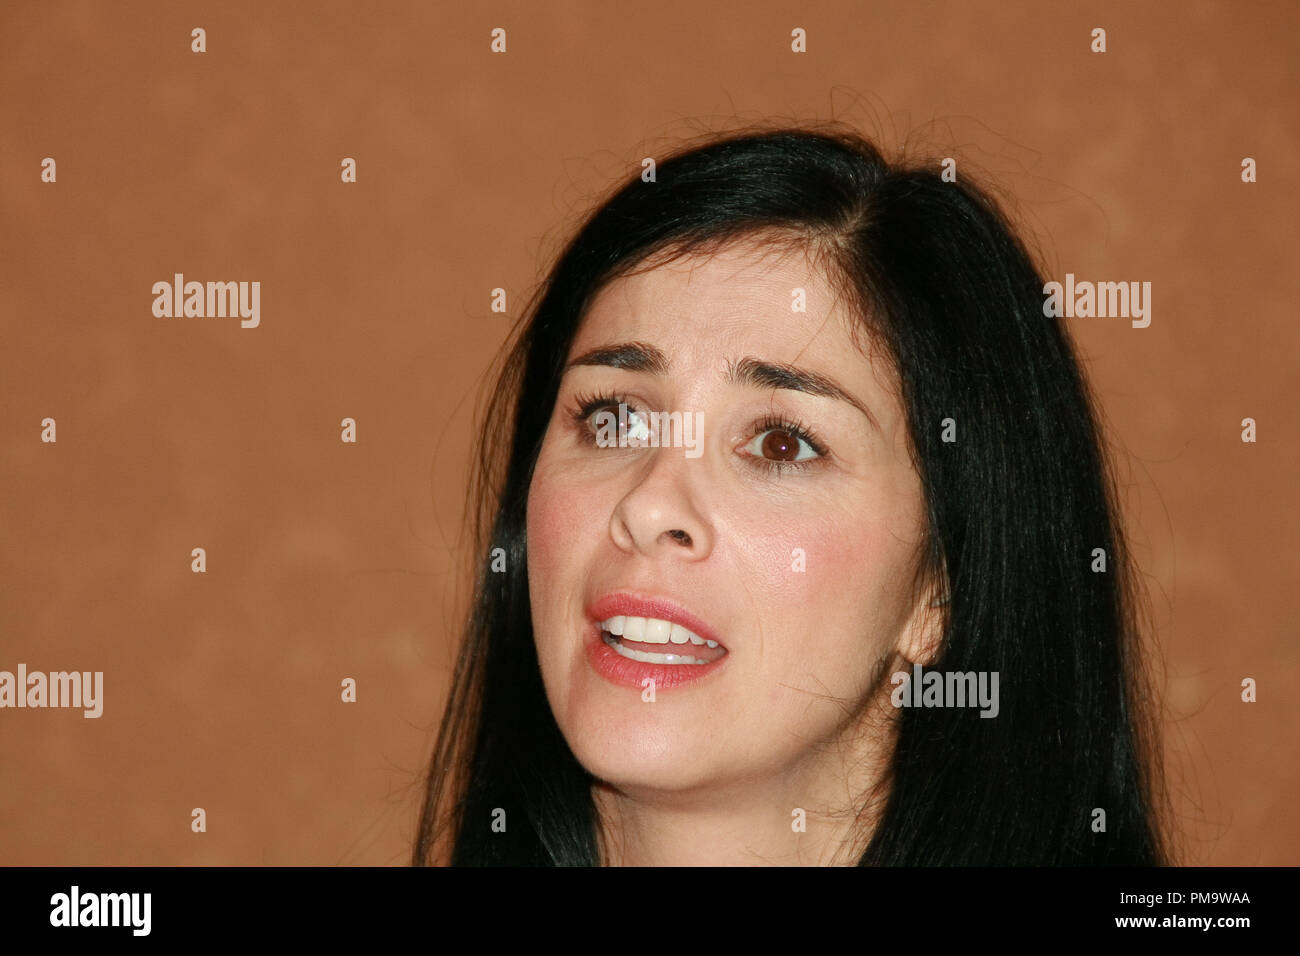 Sarah Silverman 'Wreck-it Ralph' Portrait Session, November 14, 2012. Reproduction by American tabloids is absolutely forbidden. File Reference # 31721 003JRC  For Editorial Use Only -  All Rights Reserved Stock Photo